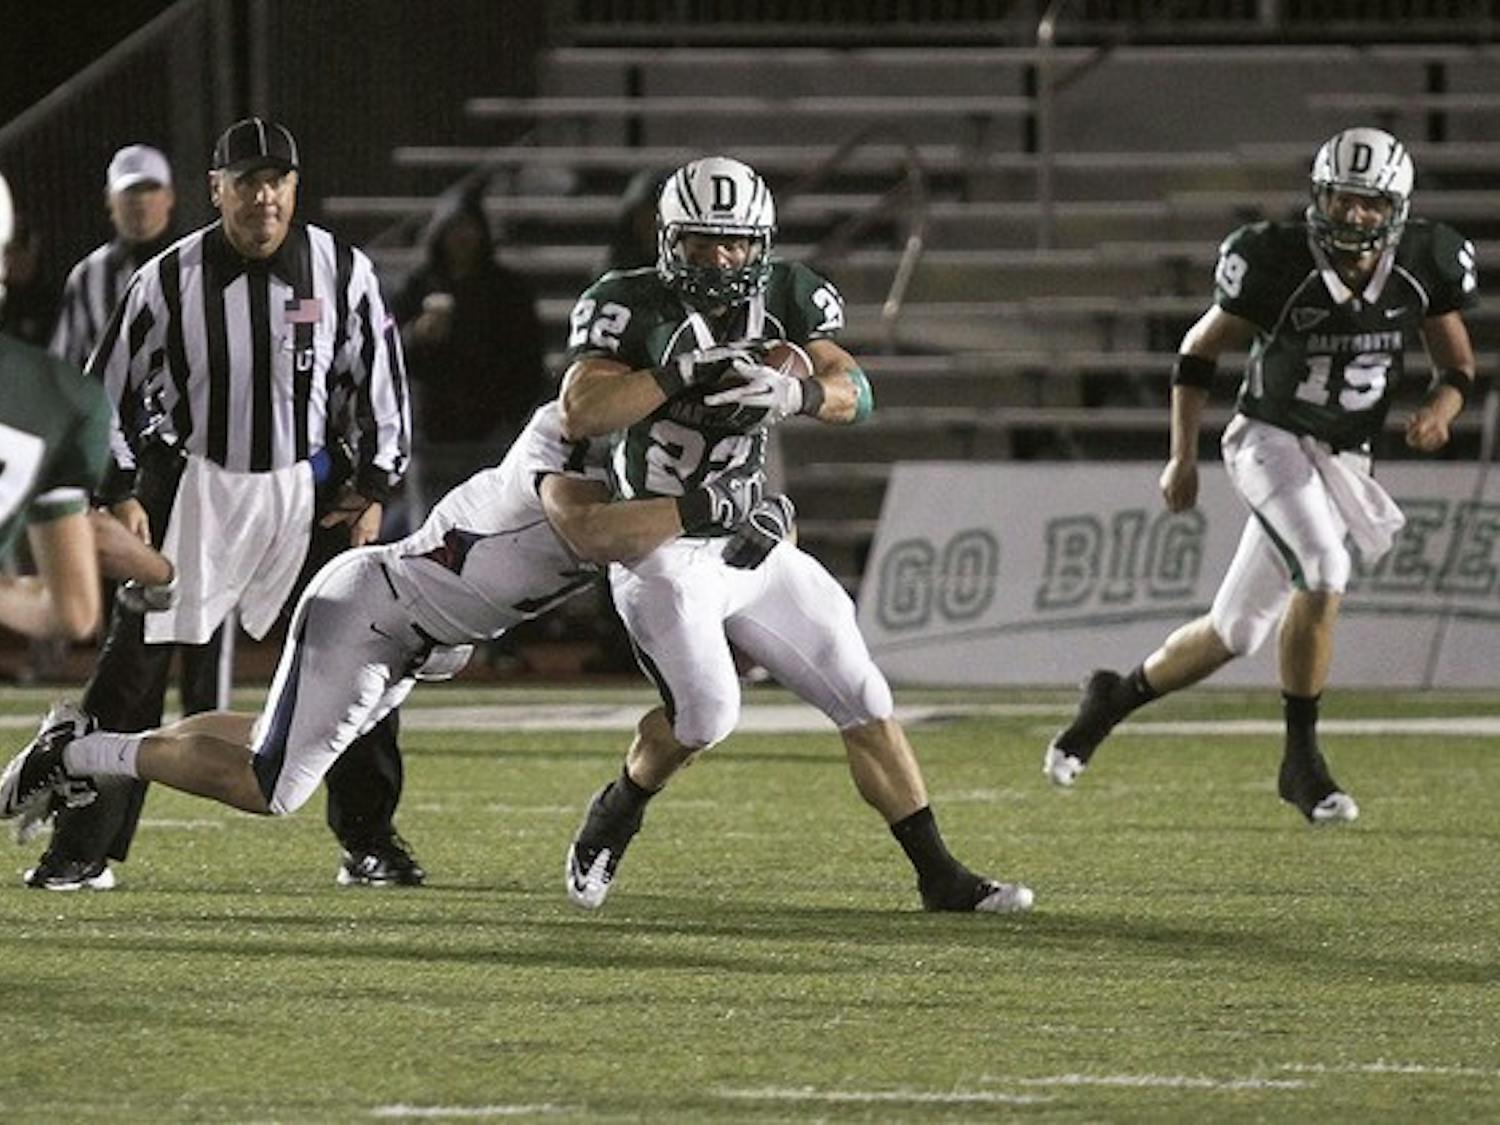 Nick Schwieger '12 leaves Dartmouth as the program's all-time leader in rushing yards with 3,150.